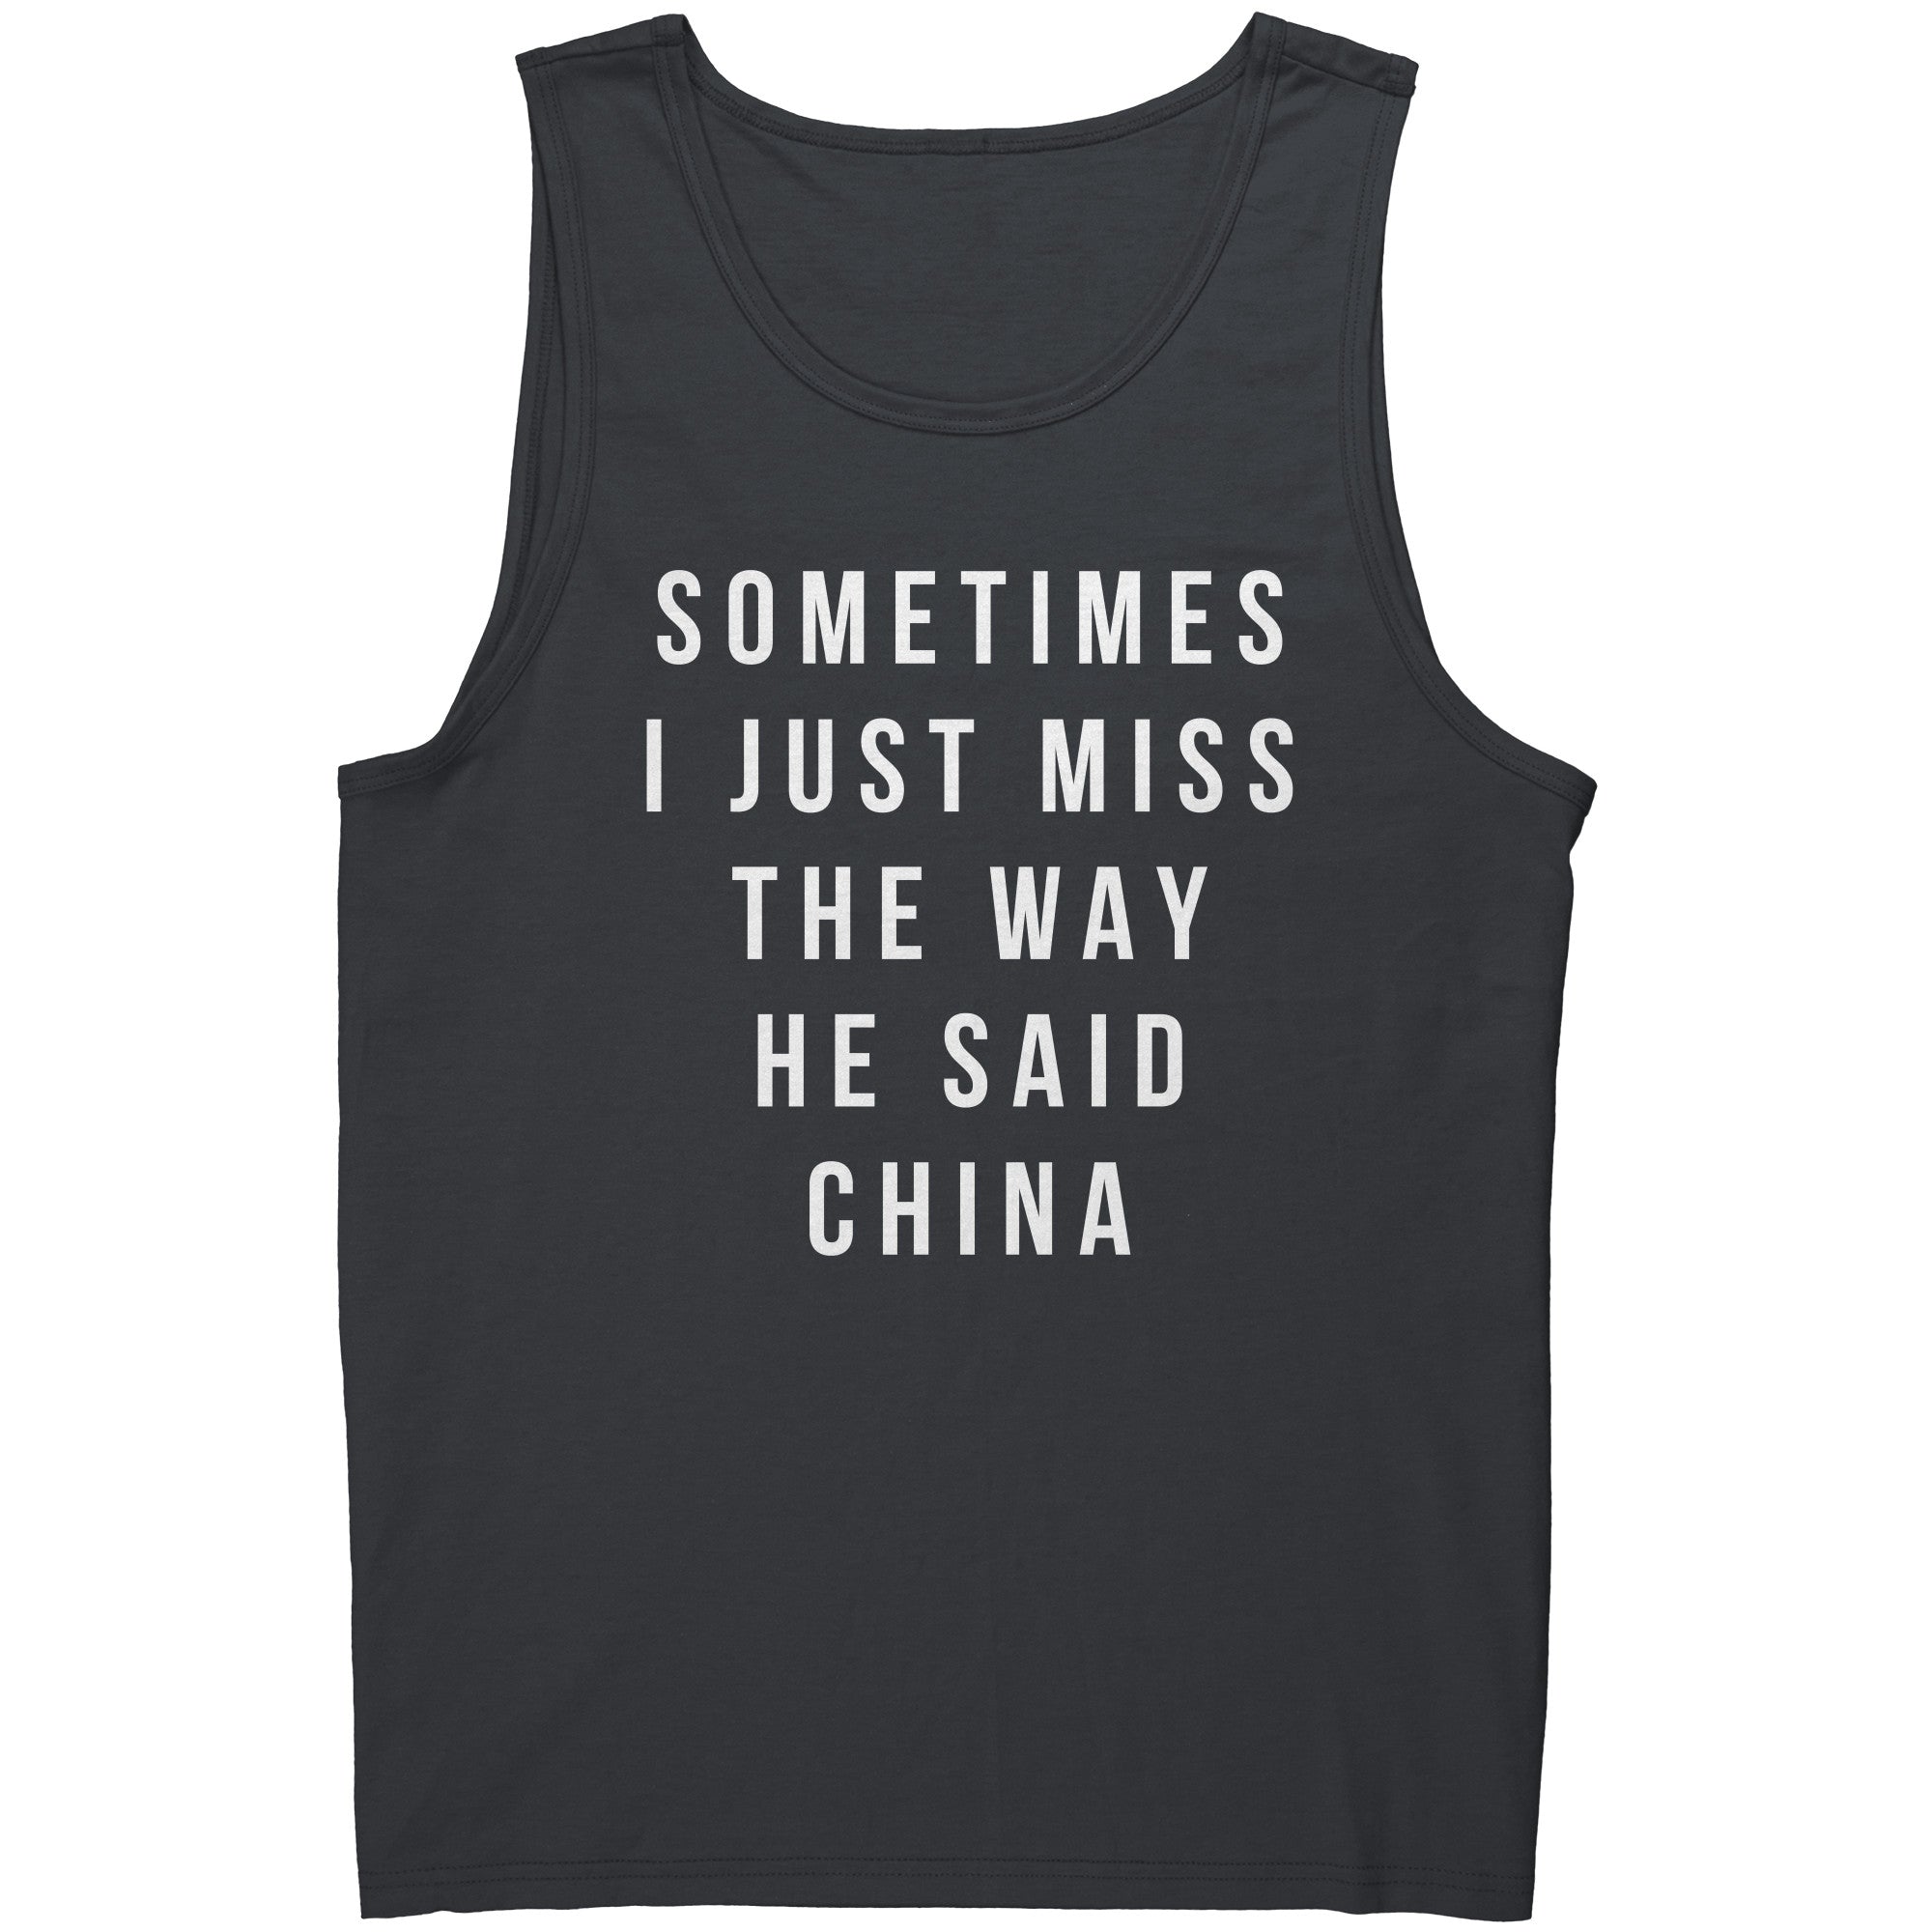 Sometimes I Just Miss The Way He Said China -Apparel | Drunk America 